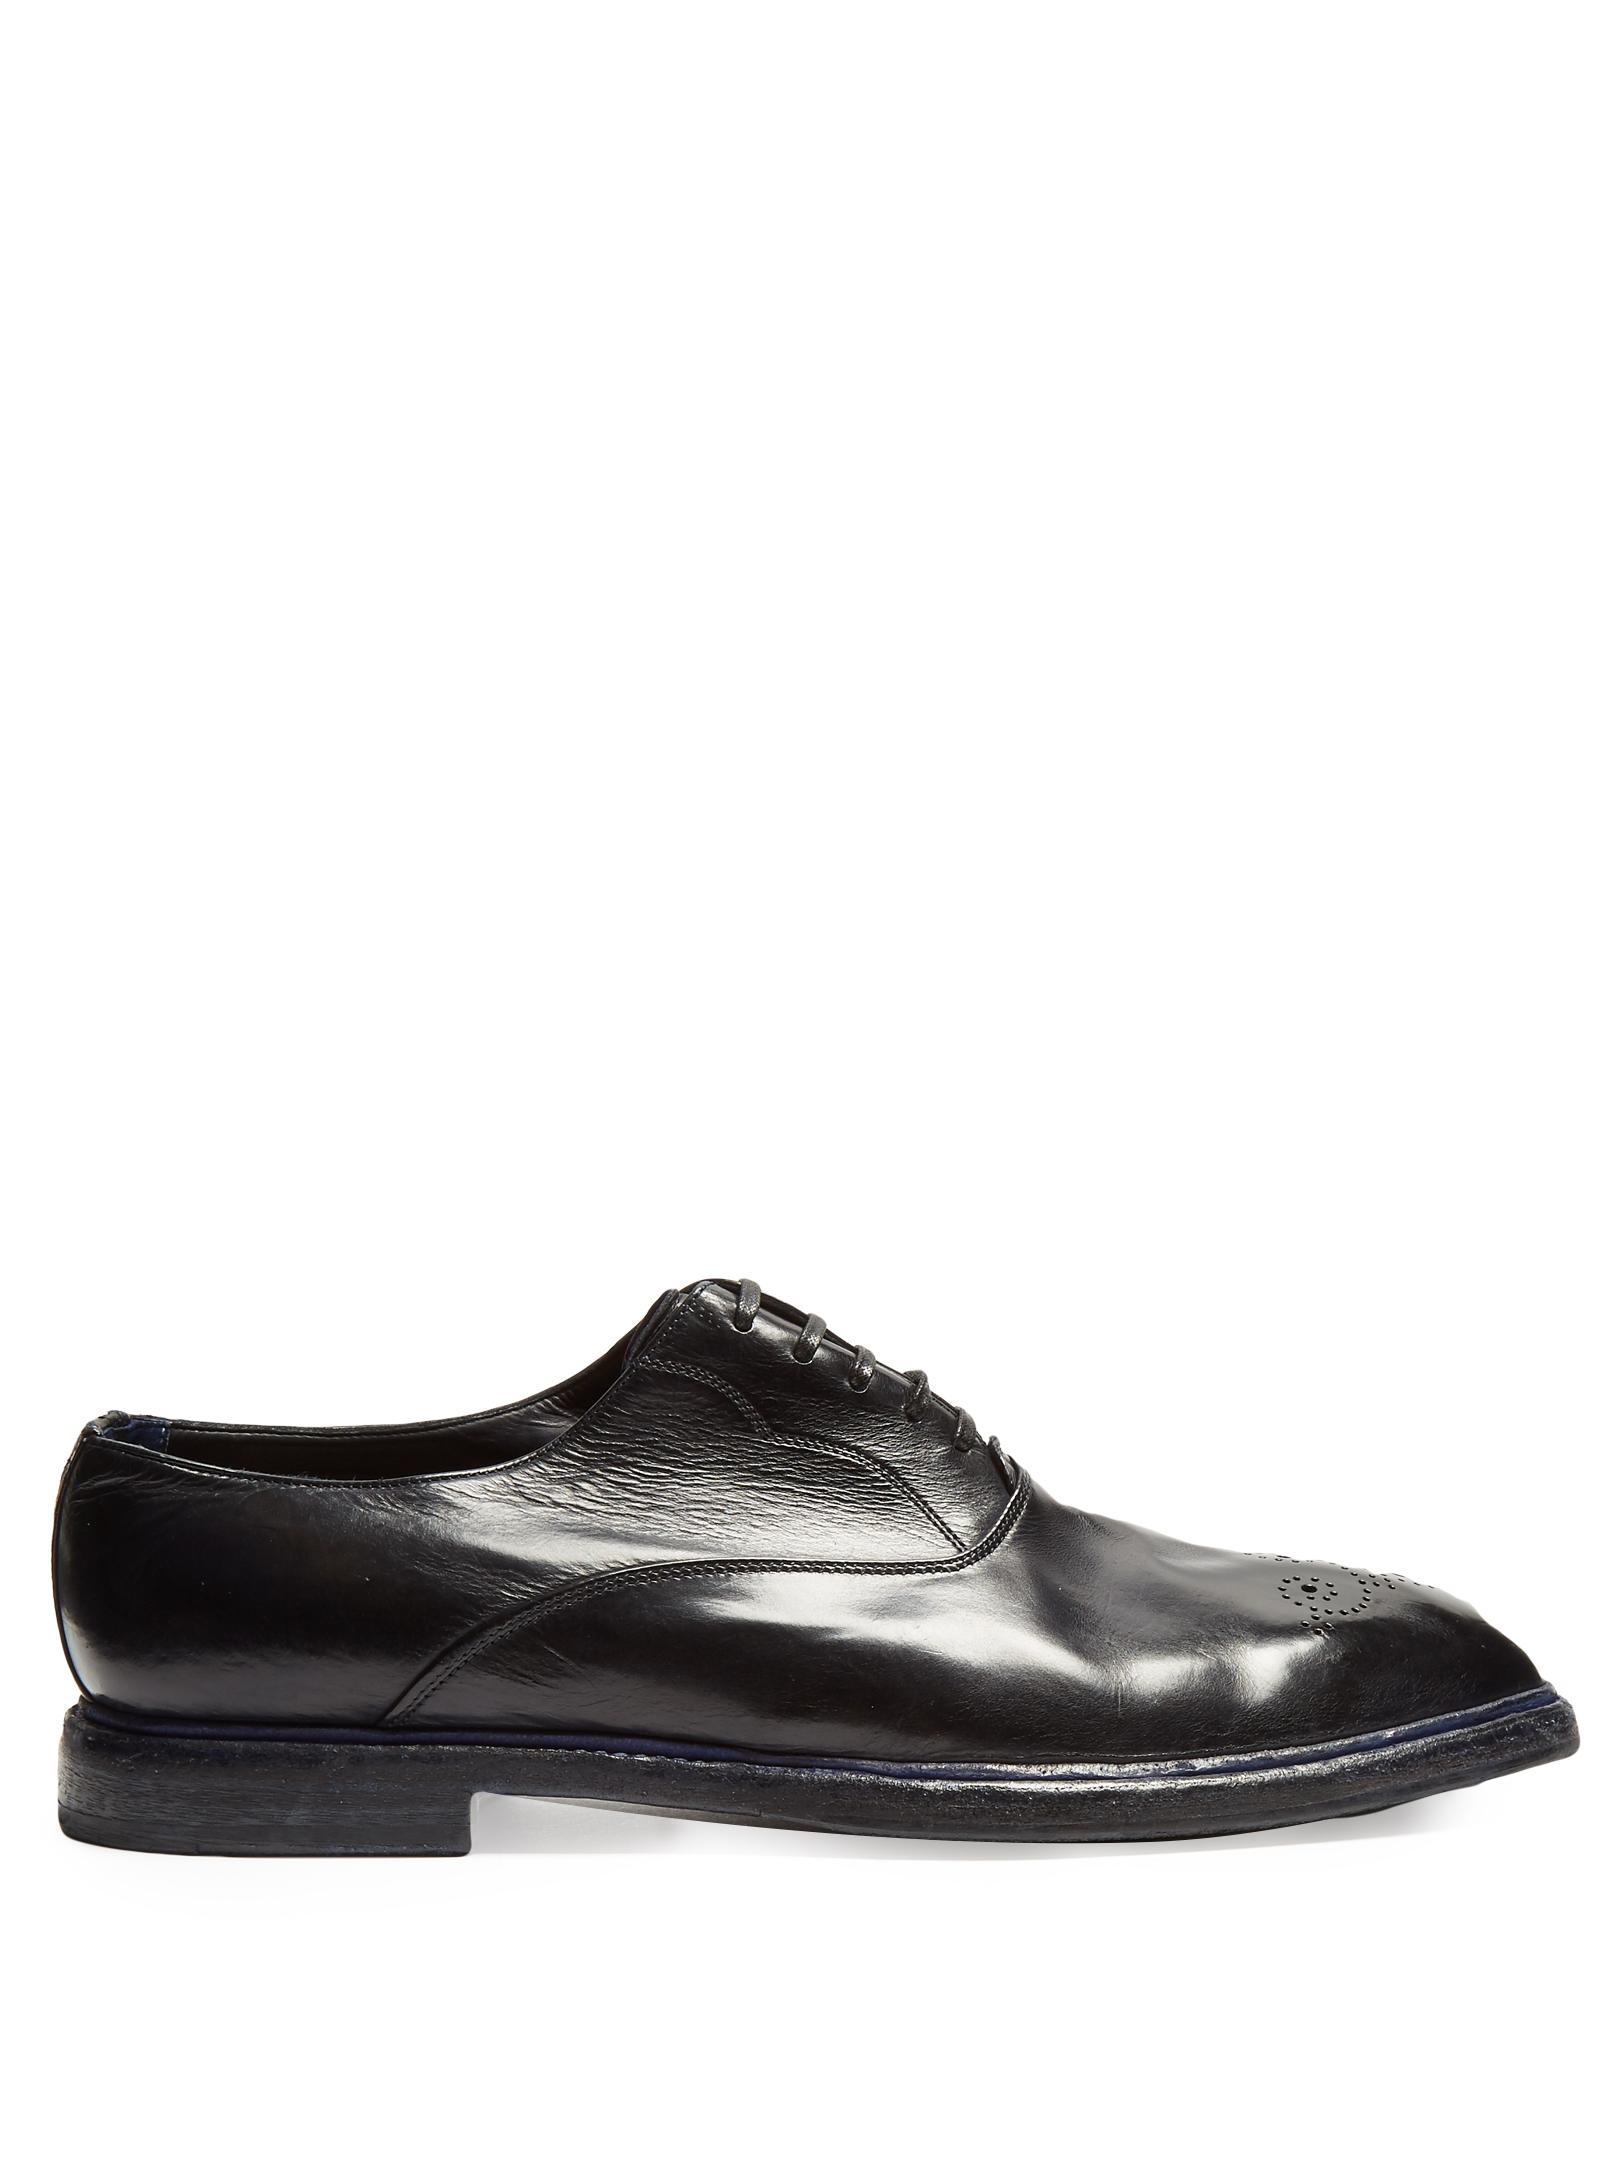 Lyst - Dolce & Gabbana Antique Leather Brogues in Blue for Men